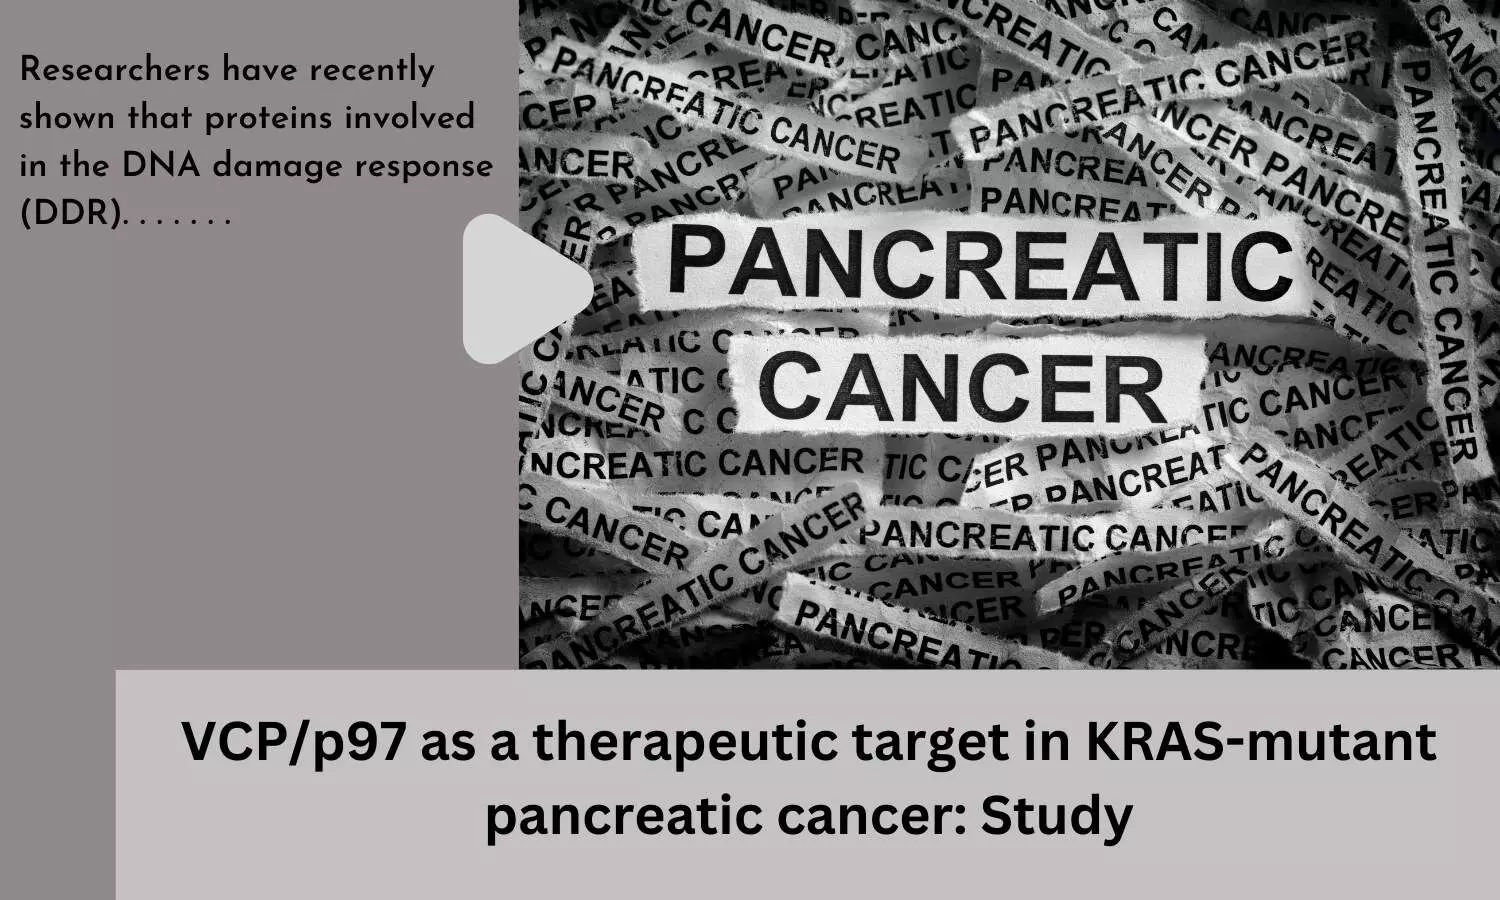 VCP/p97 as a therapeutic target in KRAS-mutant pancreatic cancer: Study